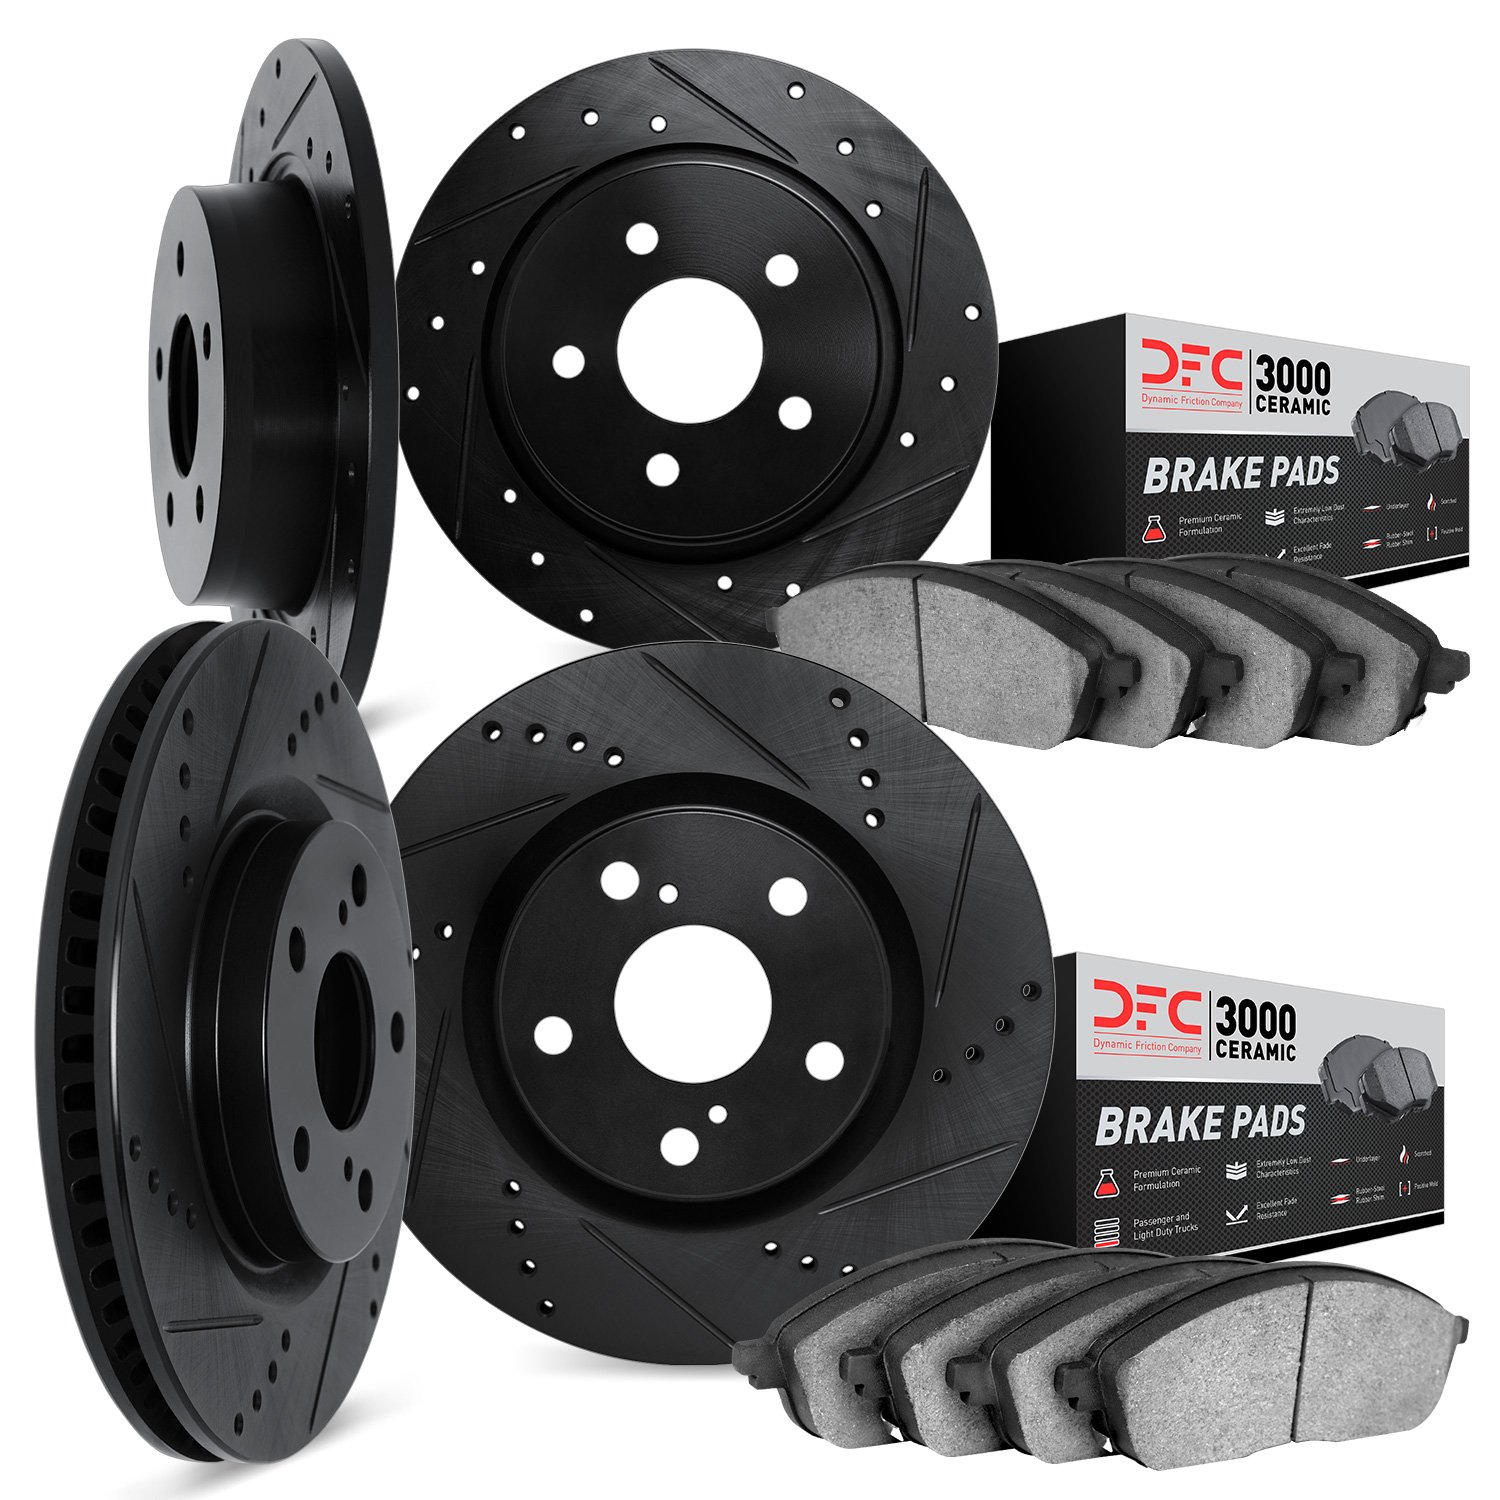 8304-59031 Drilled/Slotted Brake Rotors with 3000-Series Ceramic Brake Pads Kit [Black], 2002-2006 Acura/Honda, Position: Front